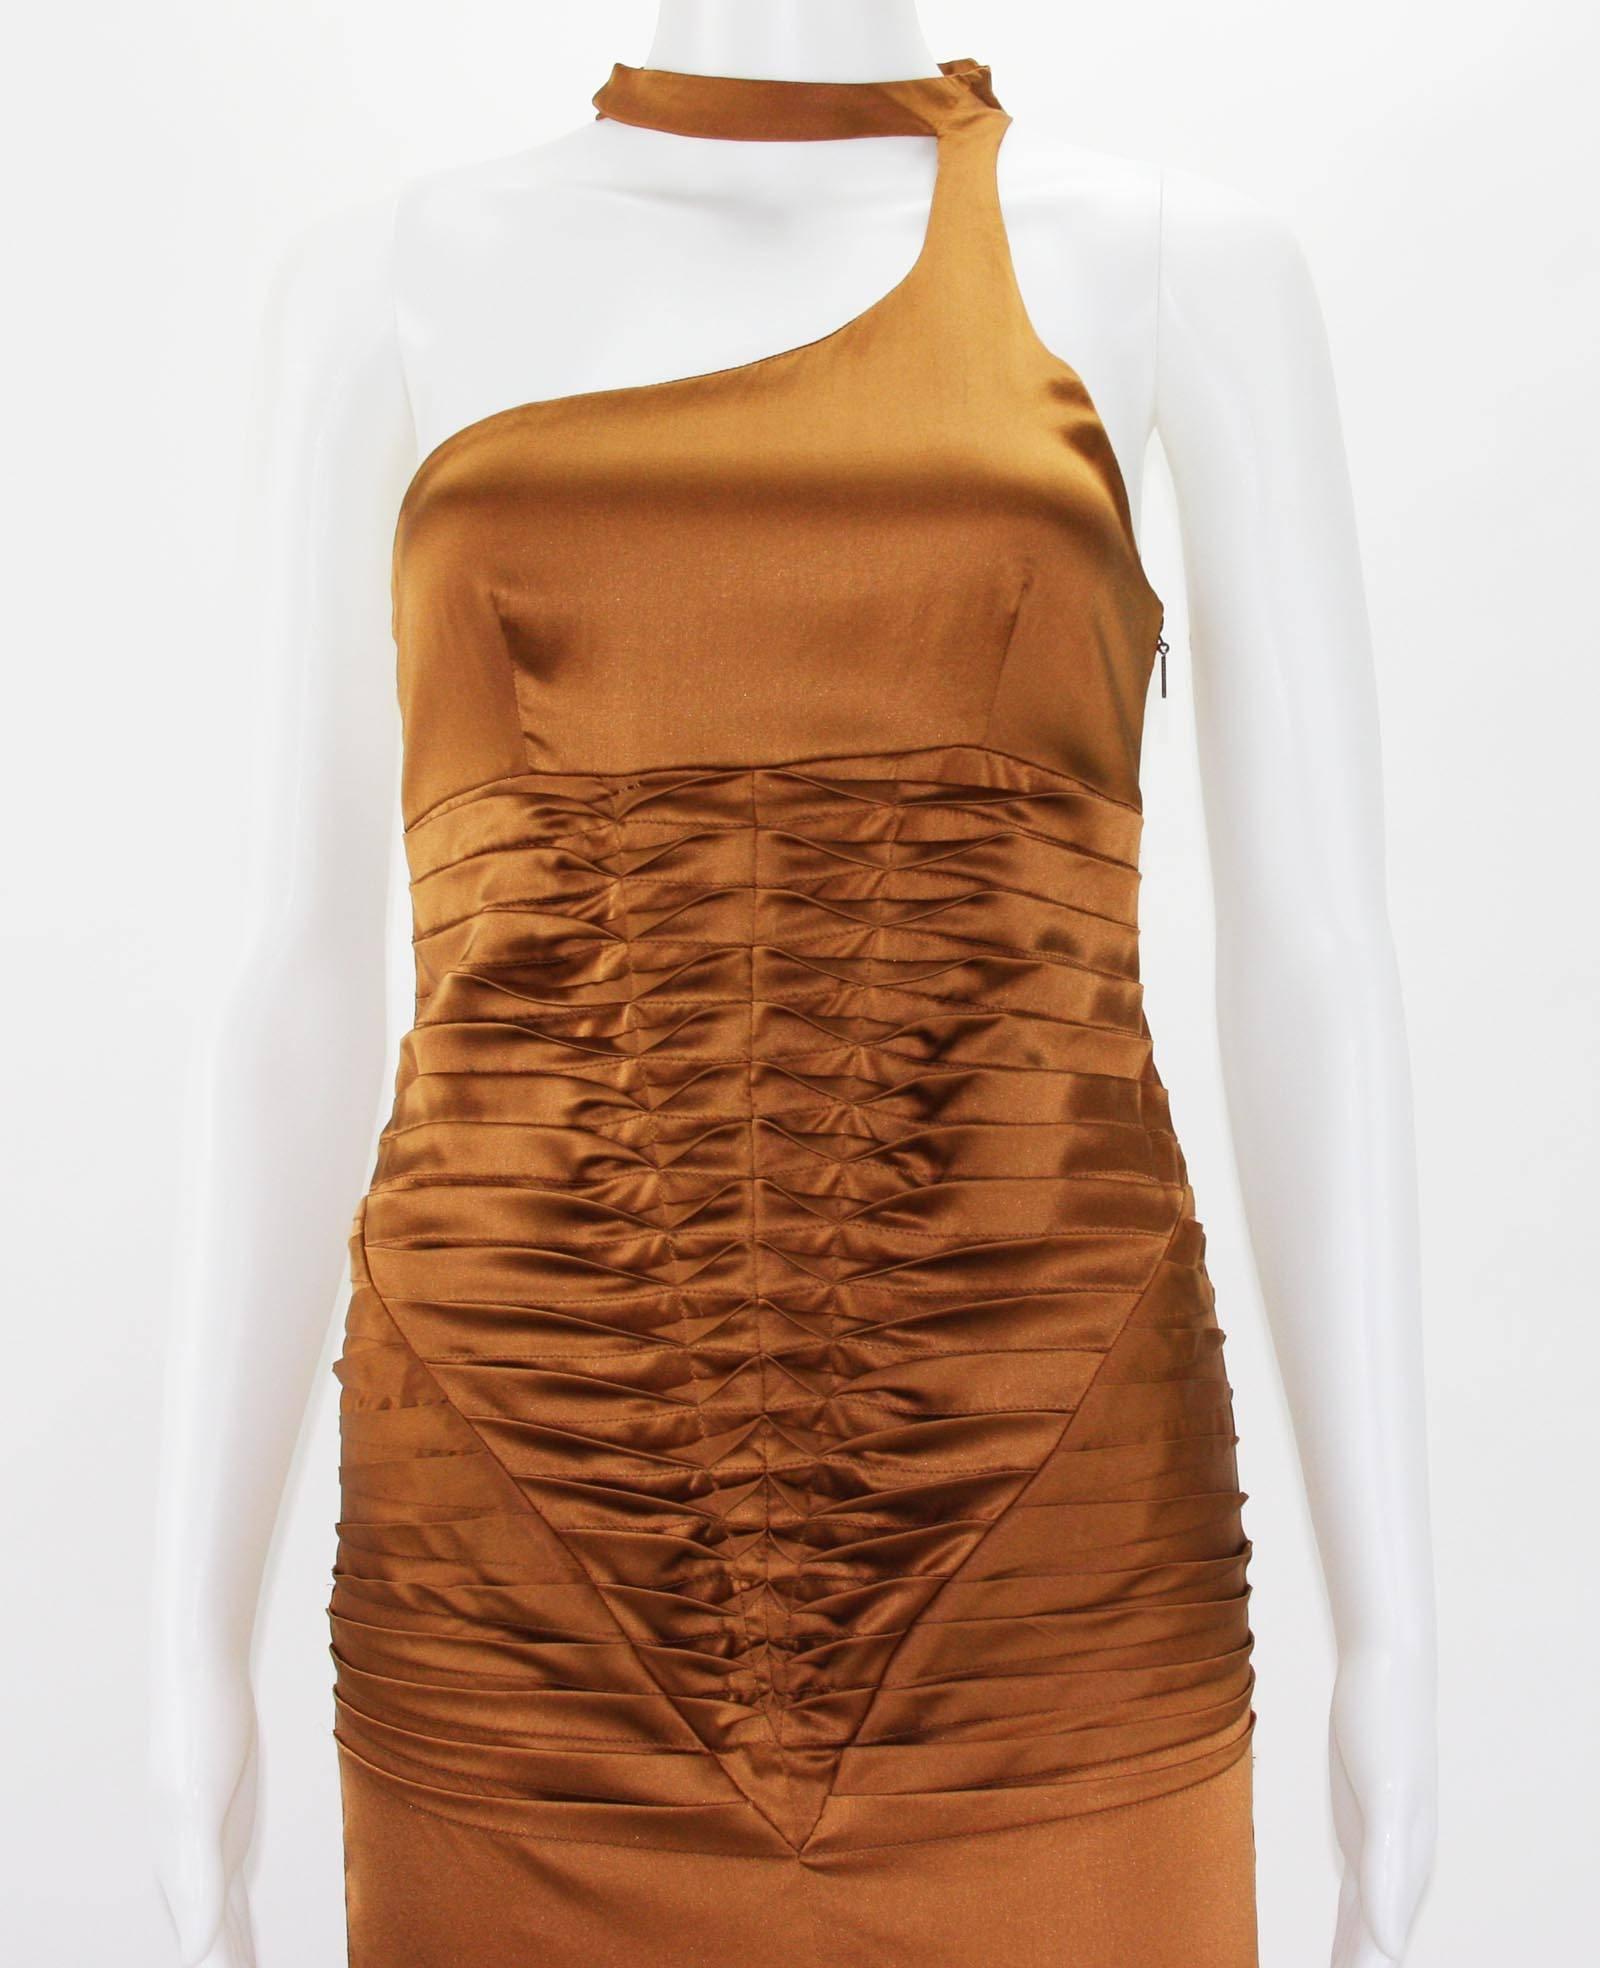 Tom Ford for Gucci 2003 Collection Silk Cooper Cocktail Dress 40 - US 4 In Excellent Condition For Sale In Montgomery, TX